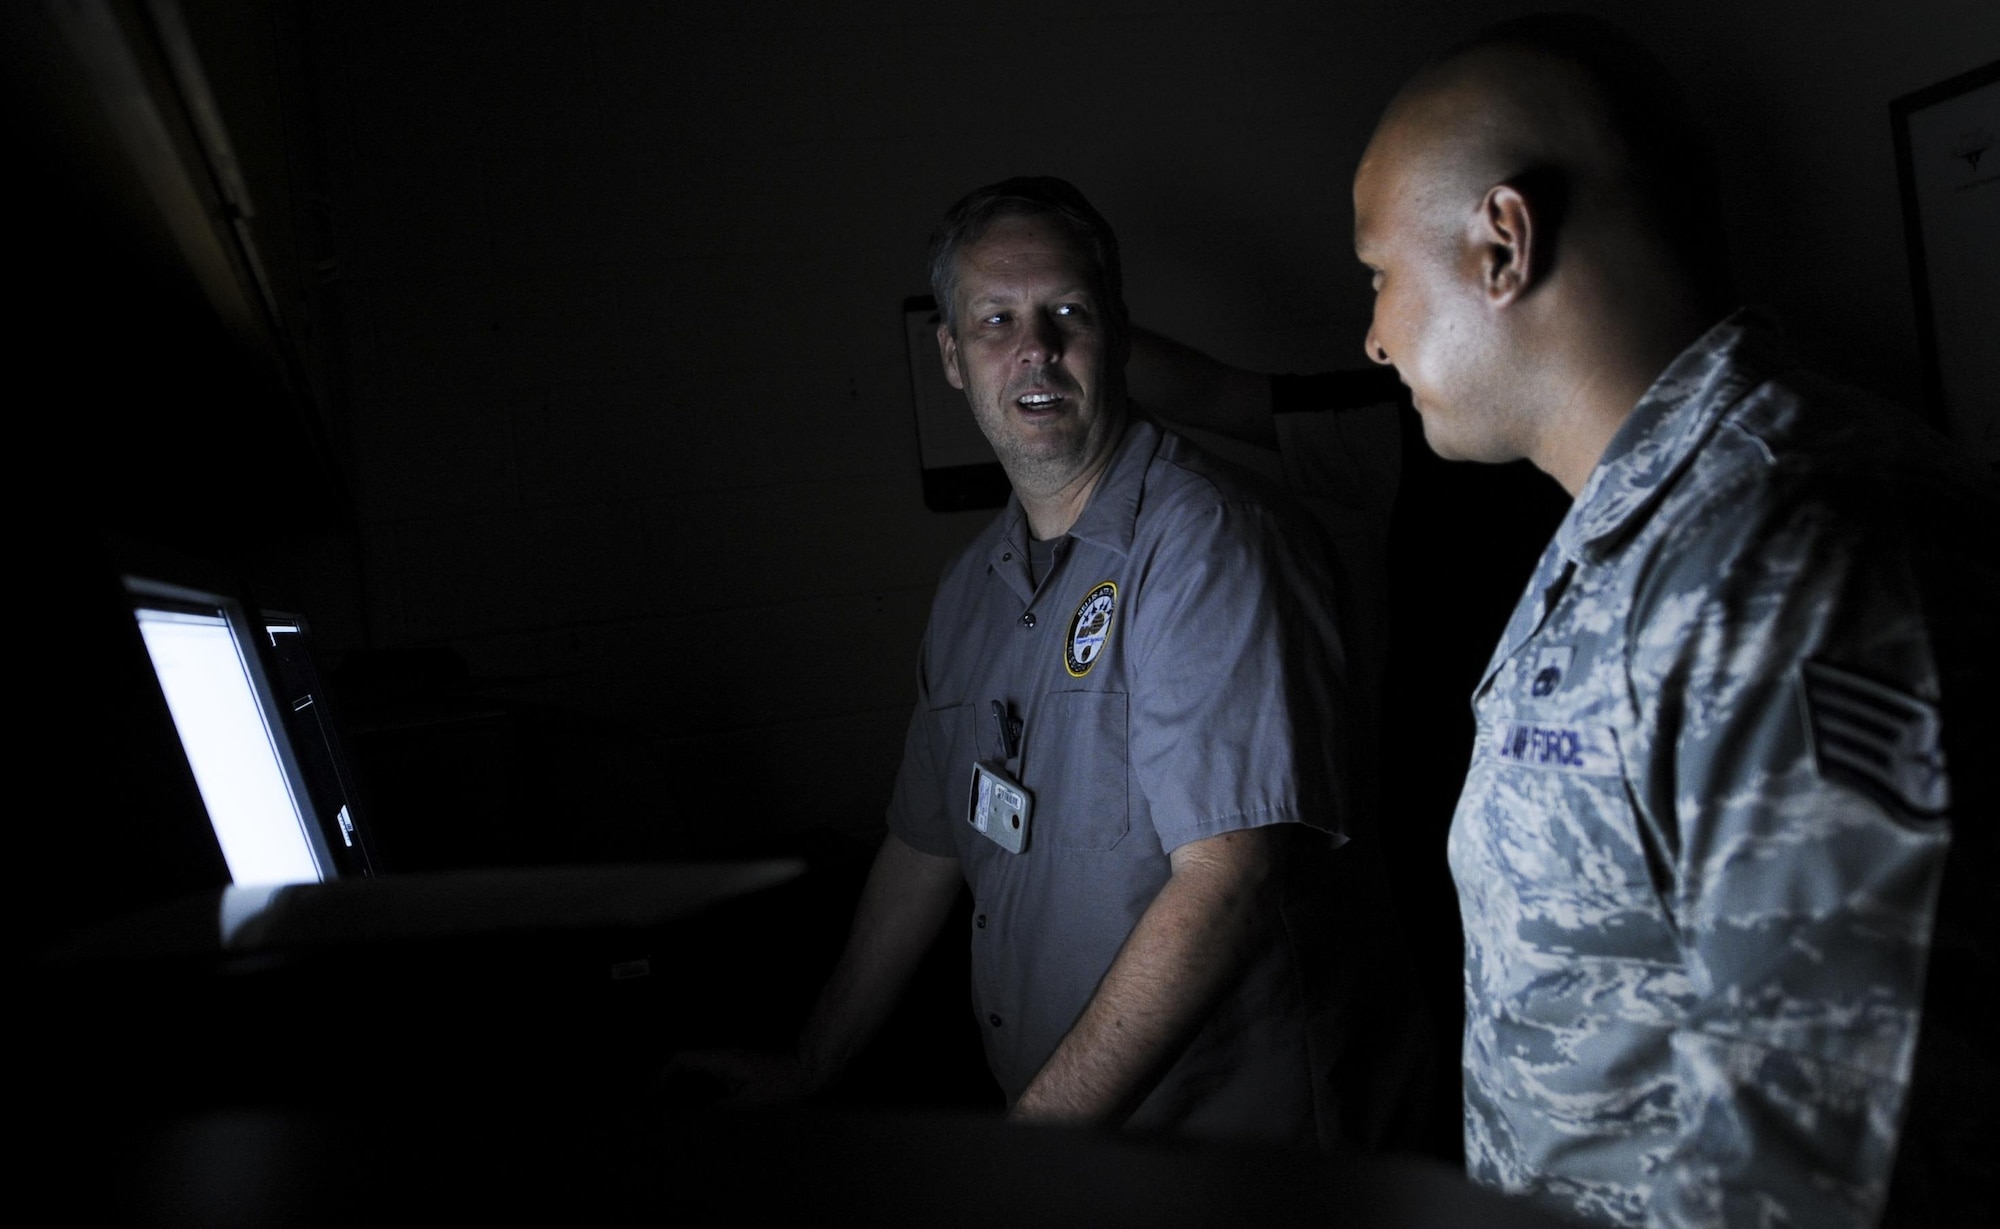 Charles Duke, M1 non-destructive inspection technician, and Staff Sgt. John Mantanona, 823rd Maintenance Squadron NDI craftsman, discuss an x-ray on the screen during training in the NDI Lab on Nellis Air Force Base, Nev., Sept. 28. The NDI Lab inspects aircraft structures and sub-assemblies for defects and foreign objects by performing oil analysis, fluorescent dye penetrant, fluorescent magnetic particle, ultrasonic, eddy current and radiographic inspections. (U.S. Air Force photo by Airman 1st Class Kevin Tanenbaum/Released)